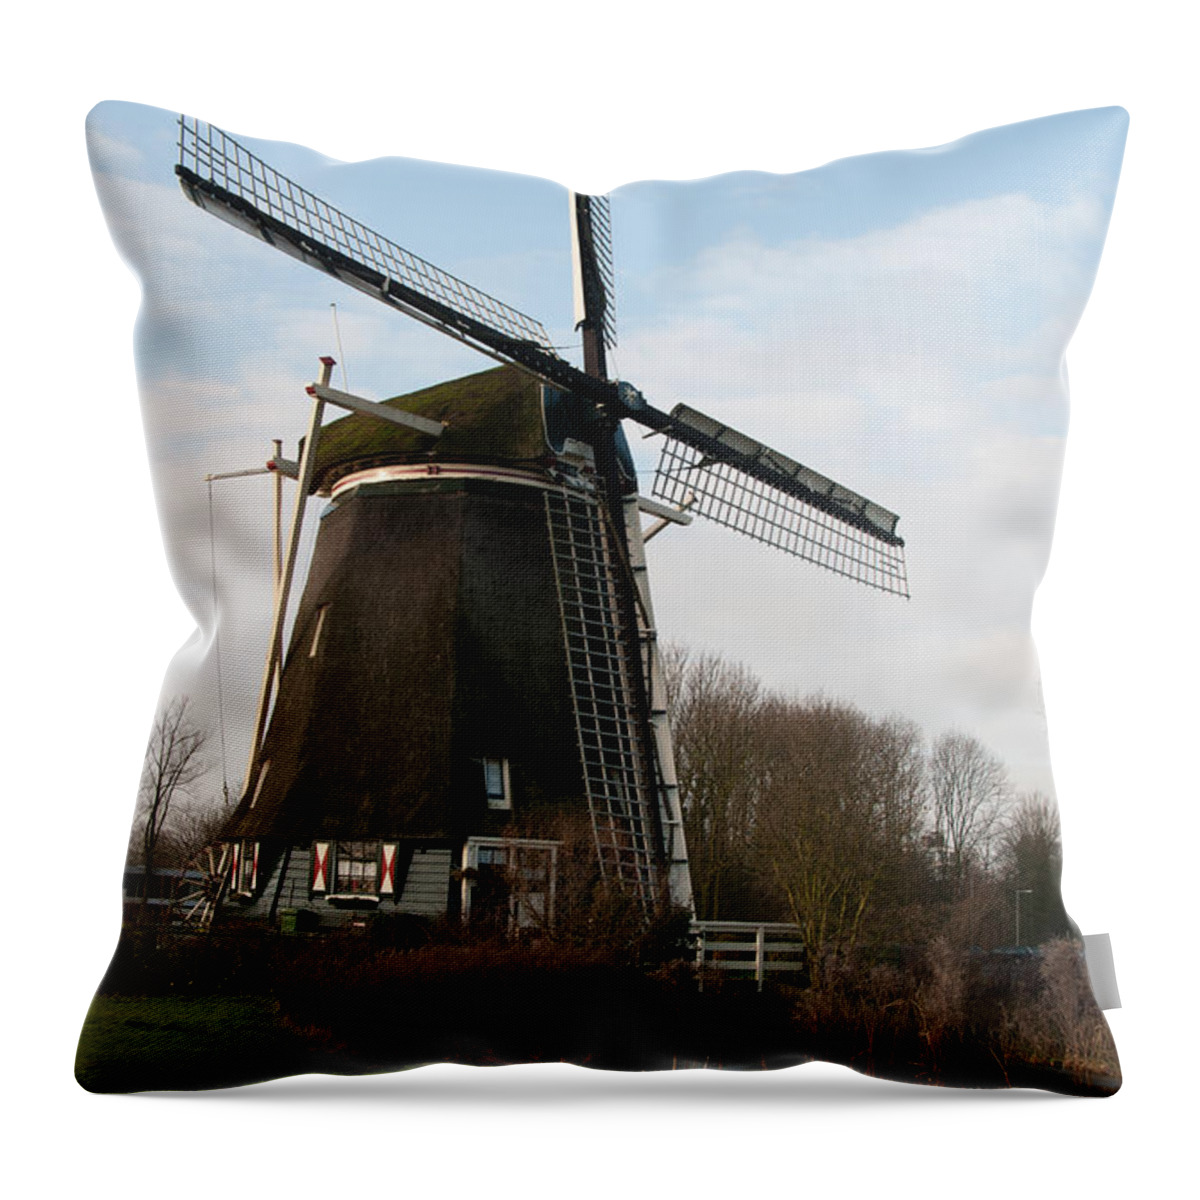 Amsterdam Throw Pillow featuring the digital art Windmill in Amsterdam by Carol Ailles